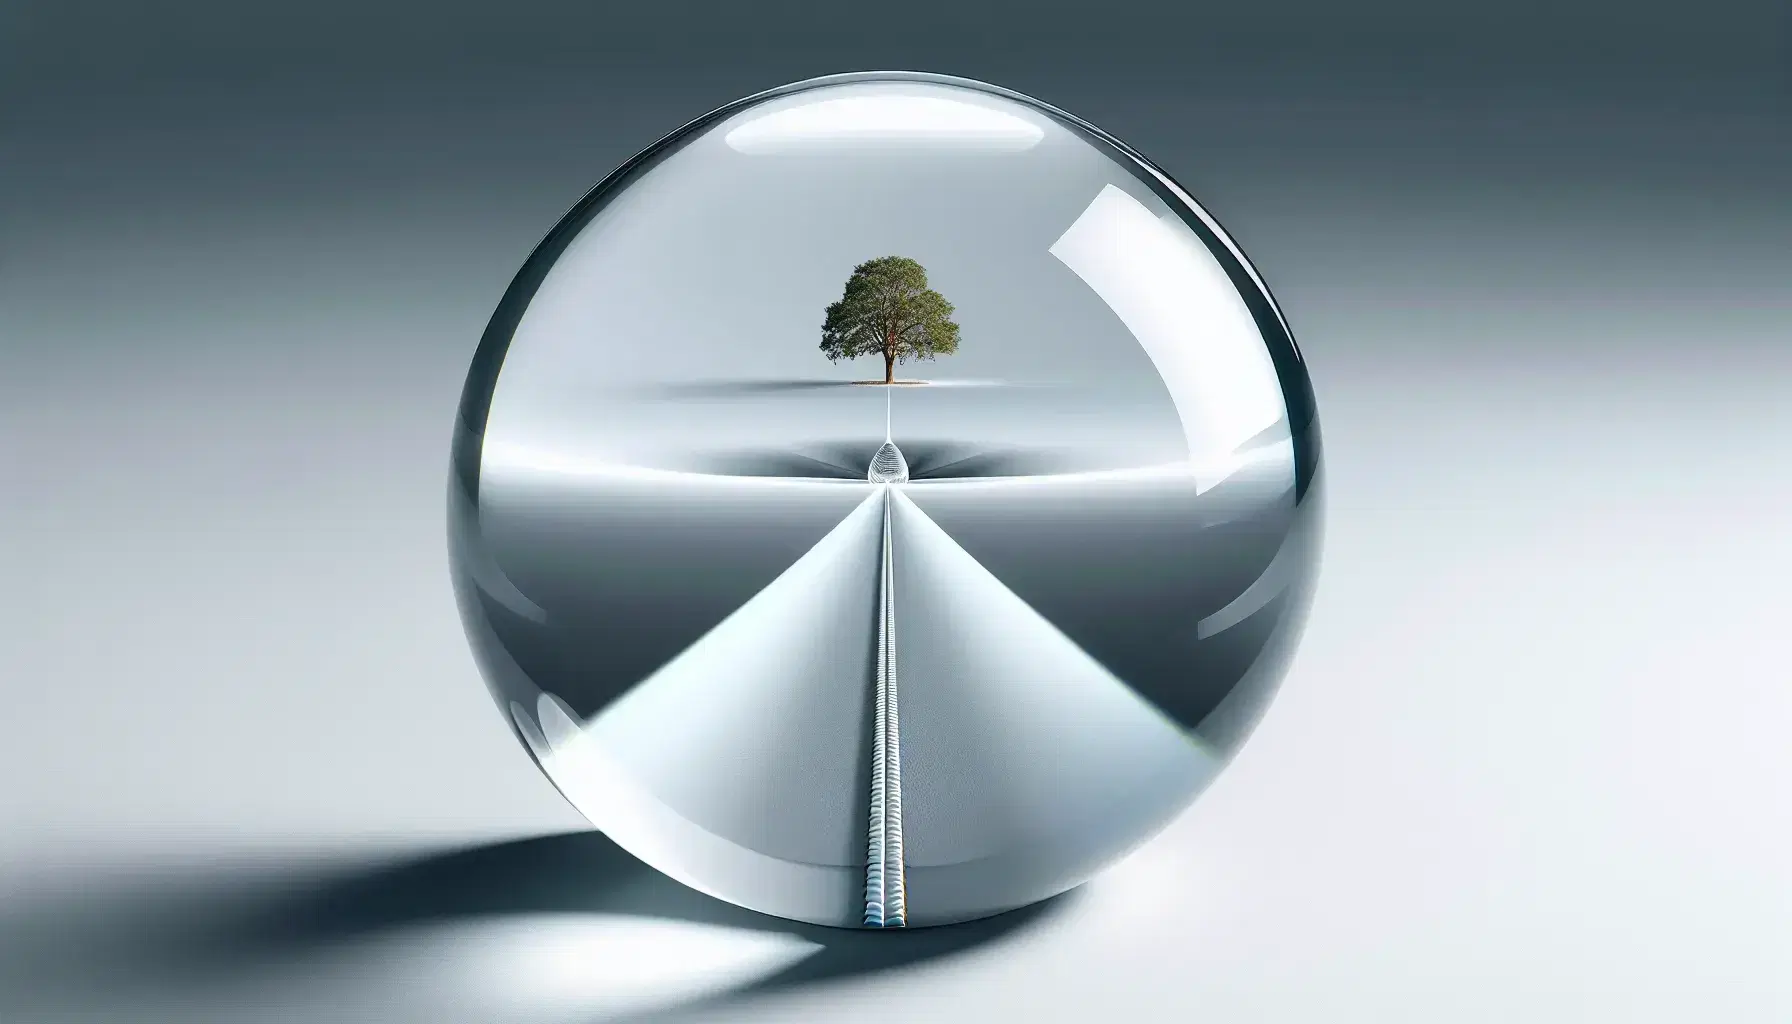 Convex lens refracting light to form a sharp focal point with an inverted real image of a tree against a gradient blue to white background.